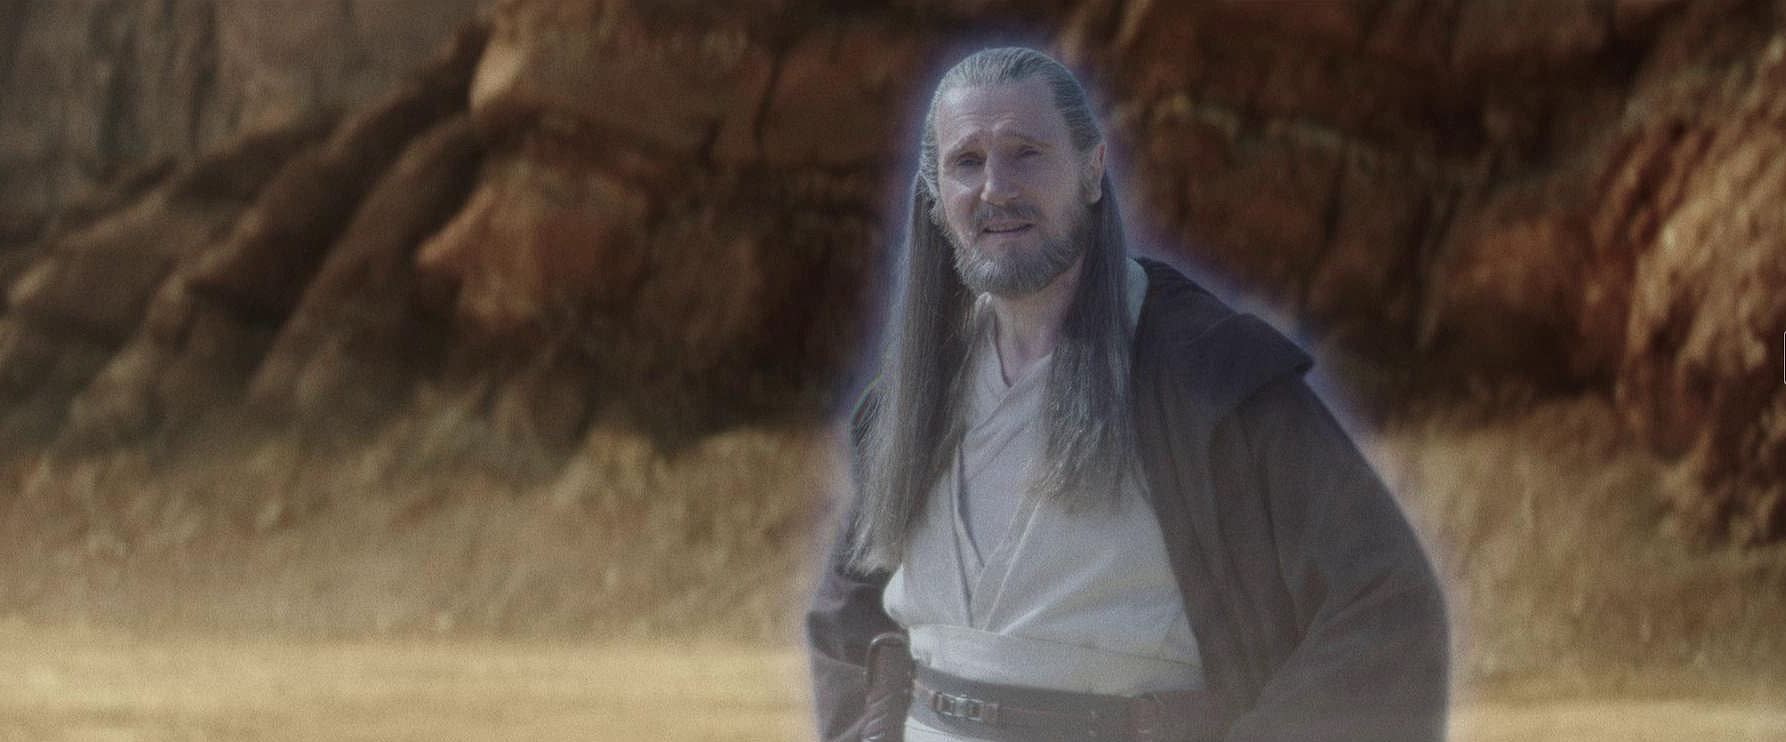 Star Wars fans call for Hamilton star to take over iconic Qui-Gon Jinn role, Films, Entertainment